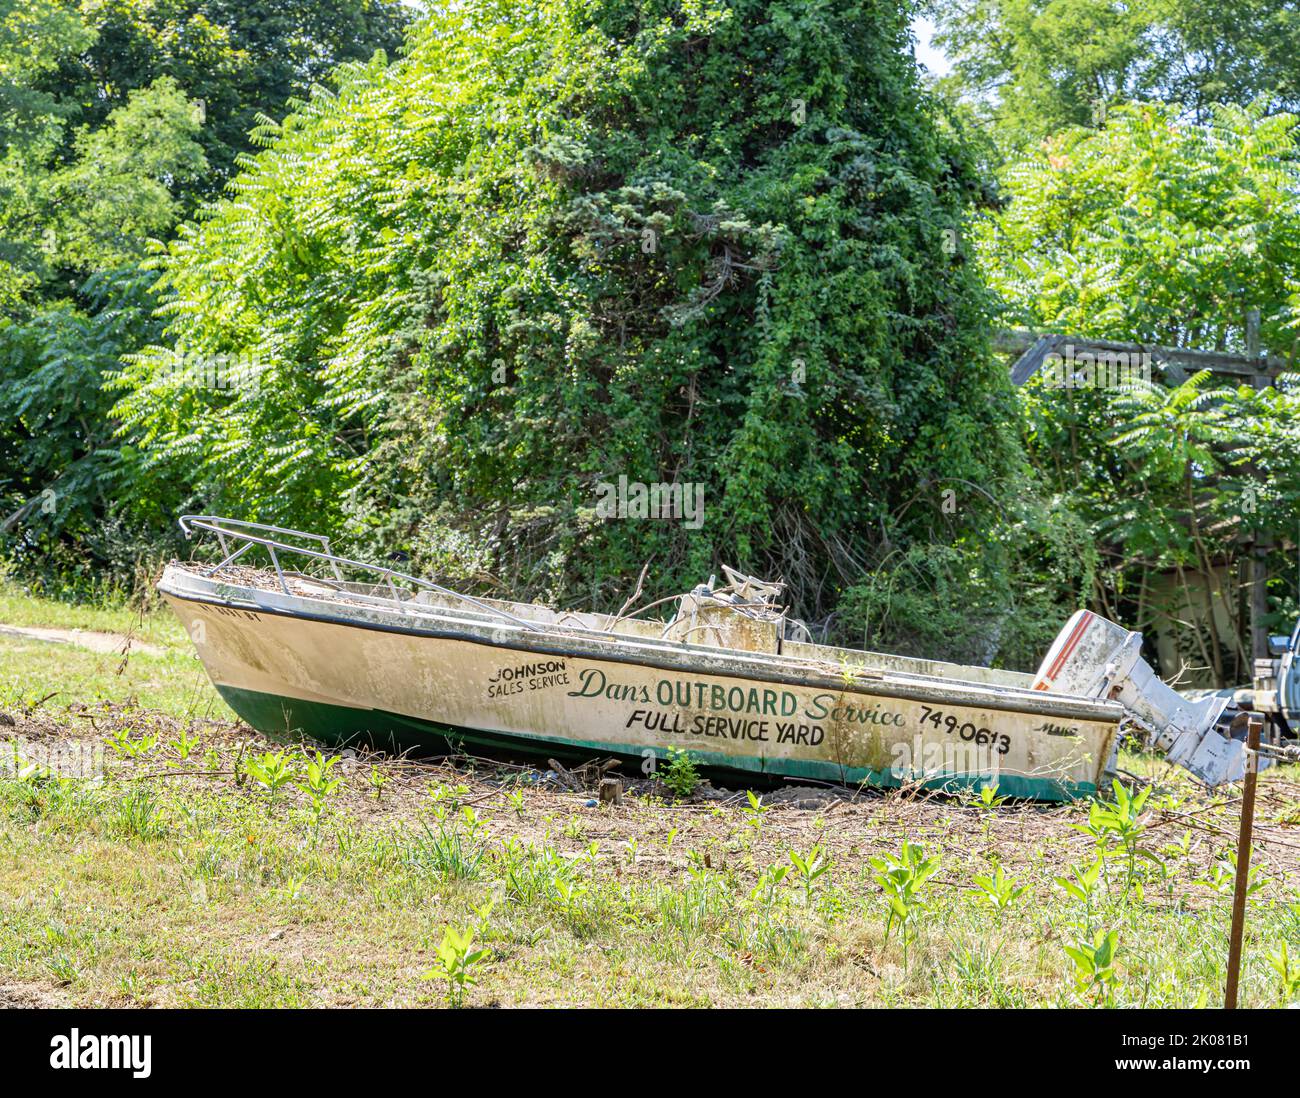 Dan's Outboard service advertised on the side of an old boat Stock Photo